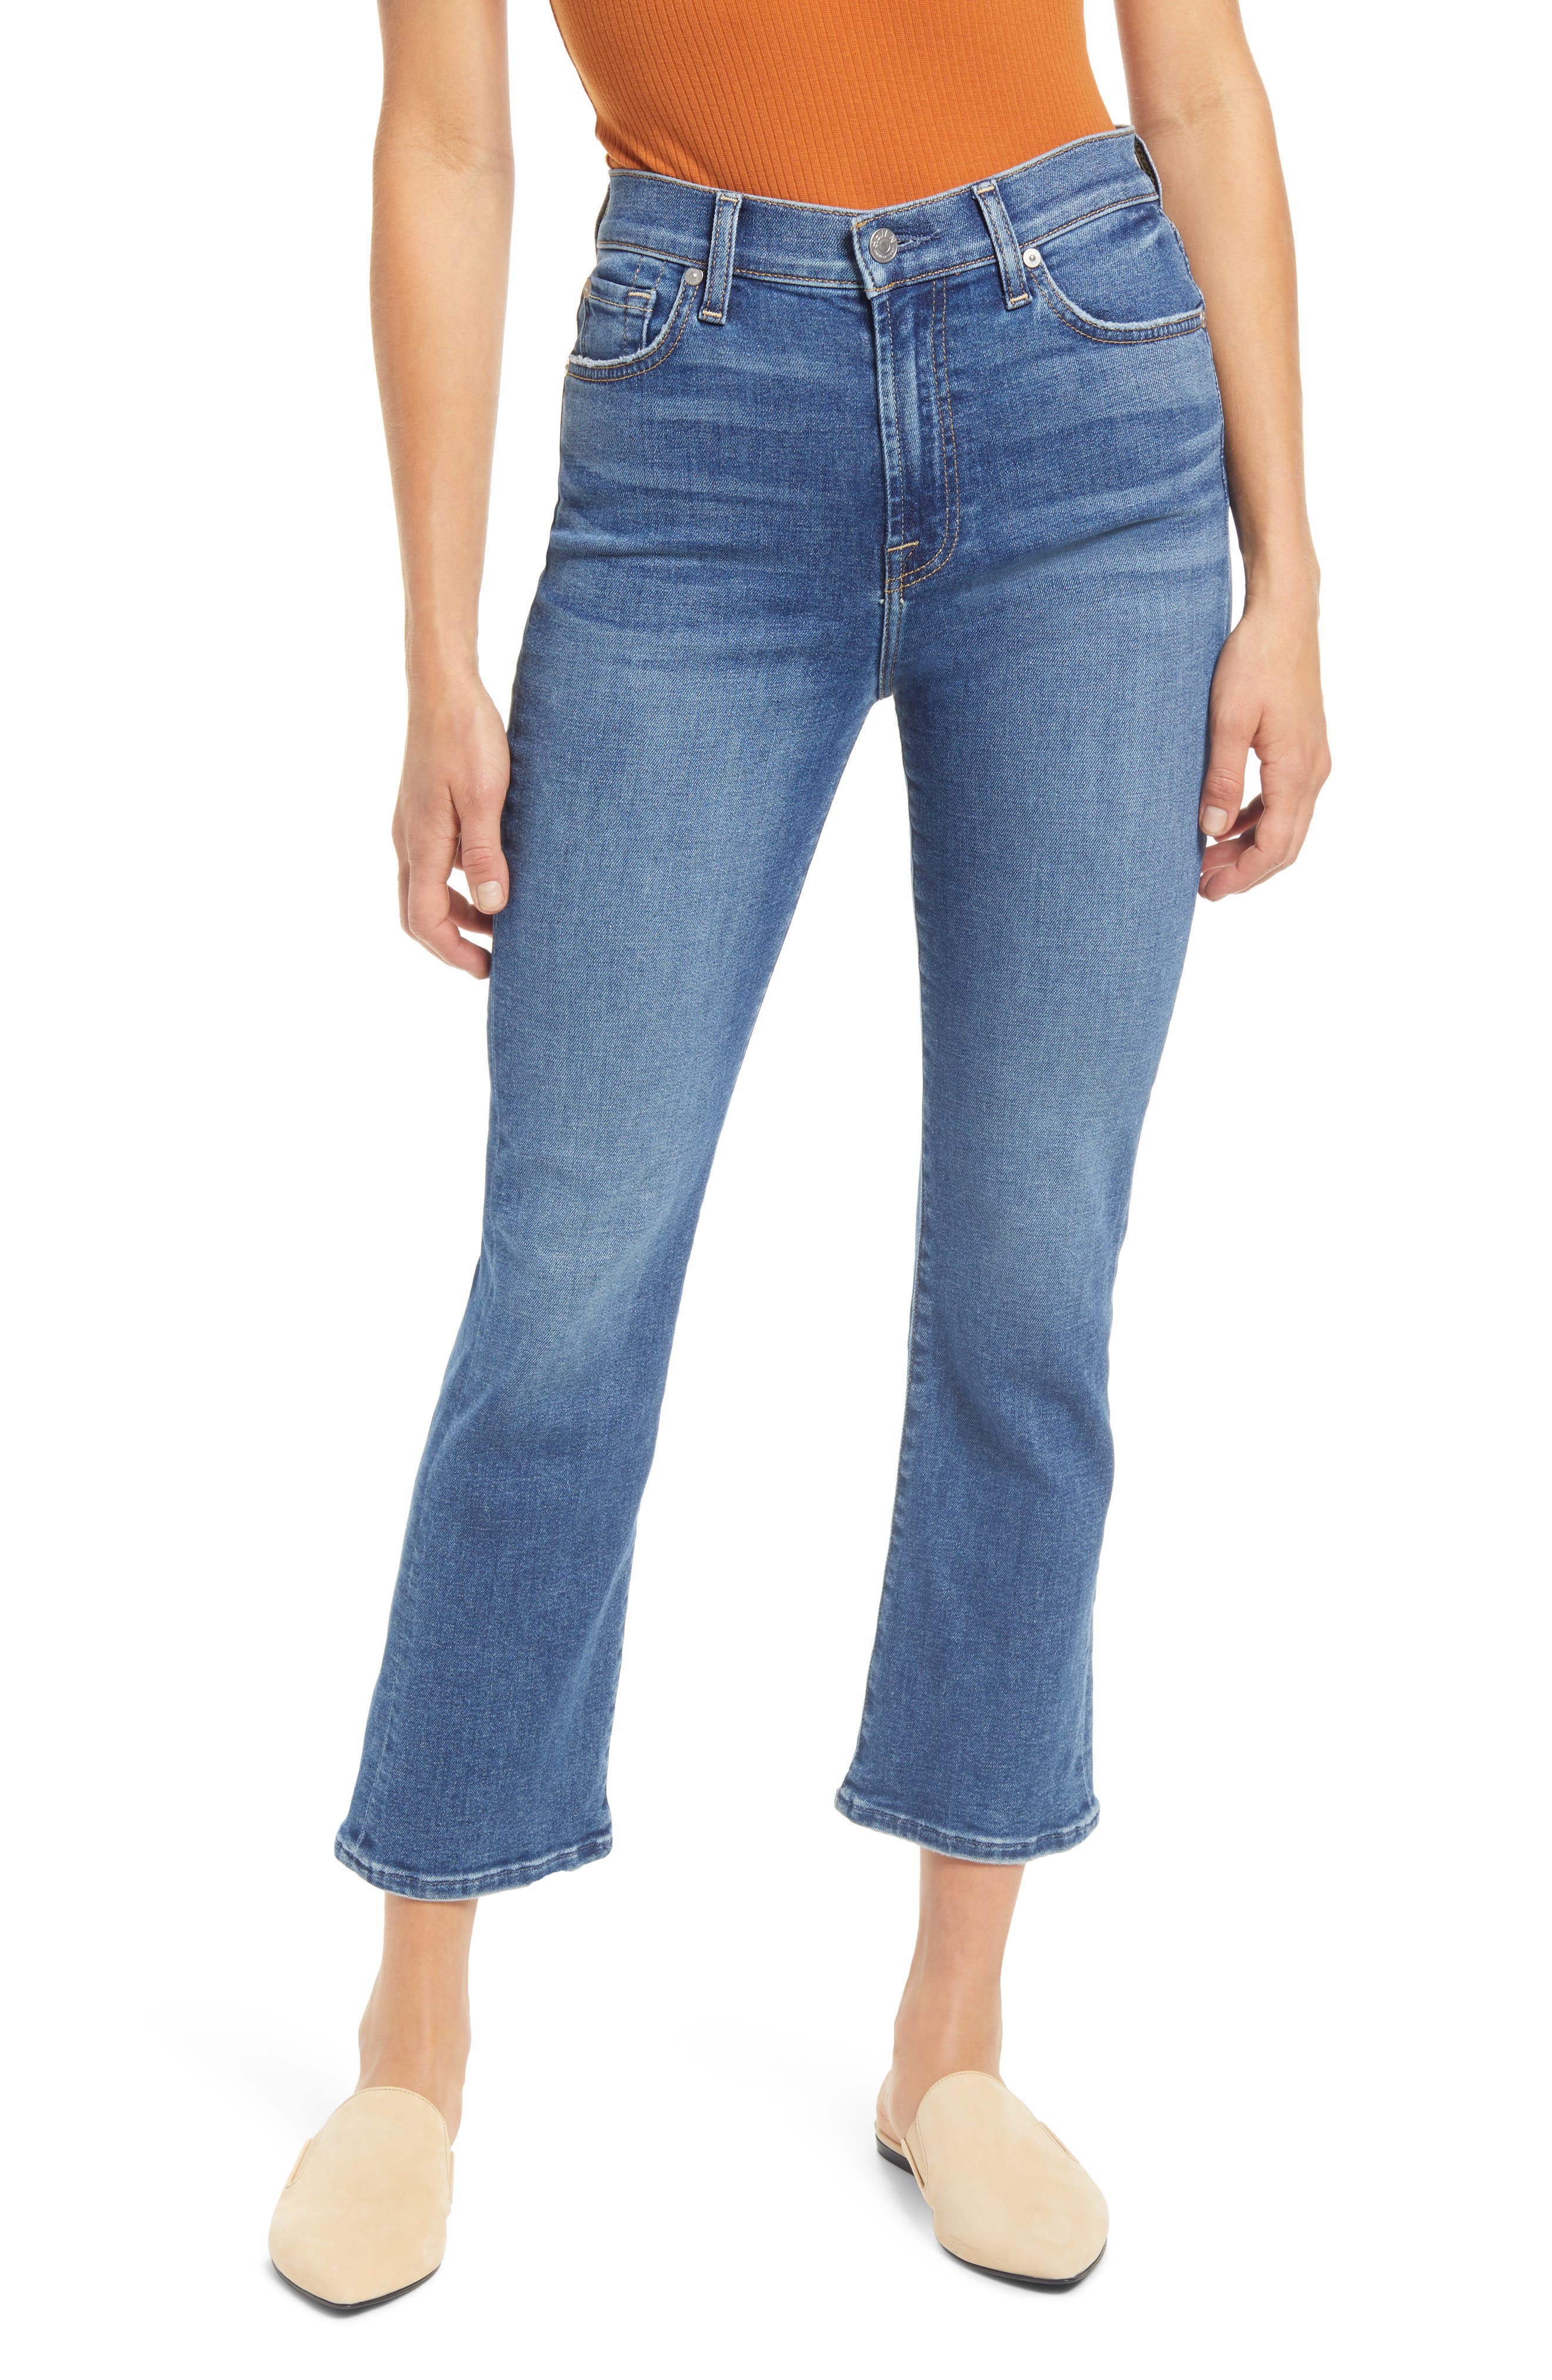 7 mankind womens jeans